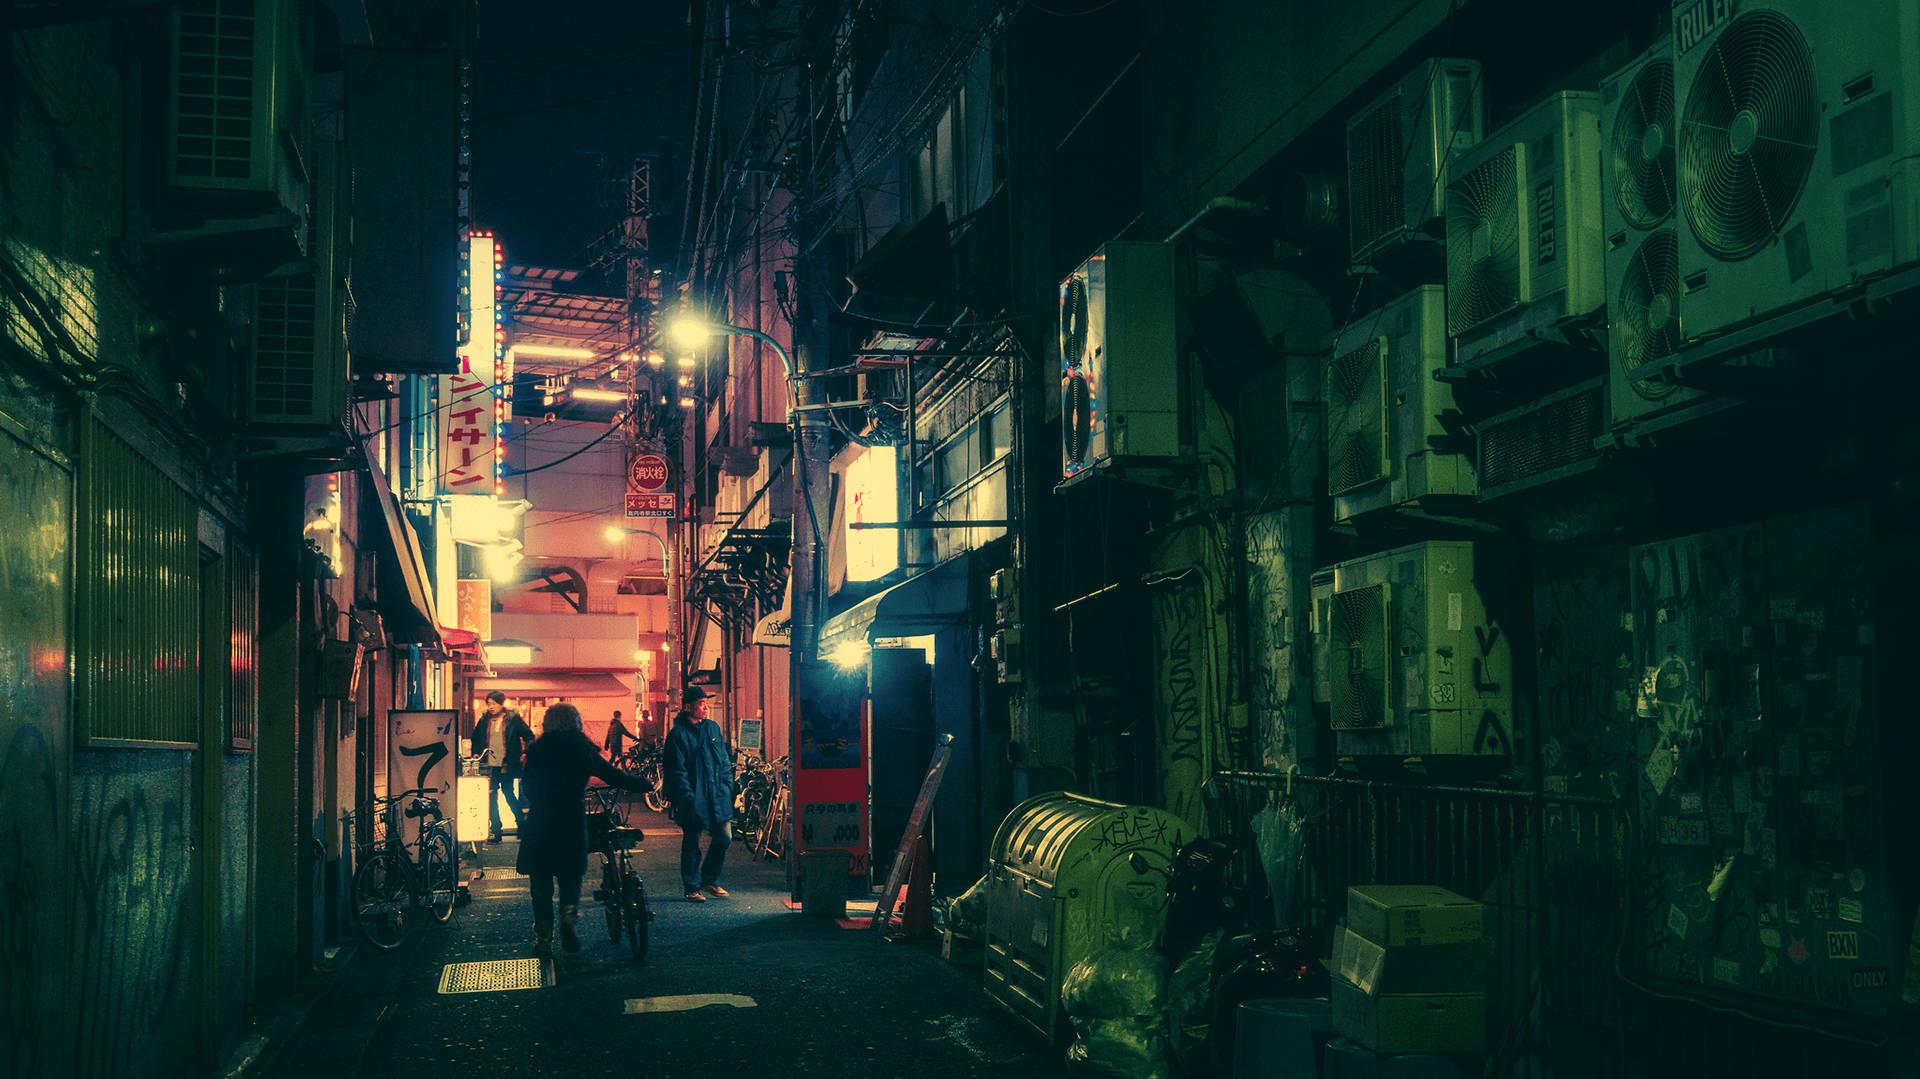 A Dark Tokyo Street Showing Traditional Japanese